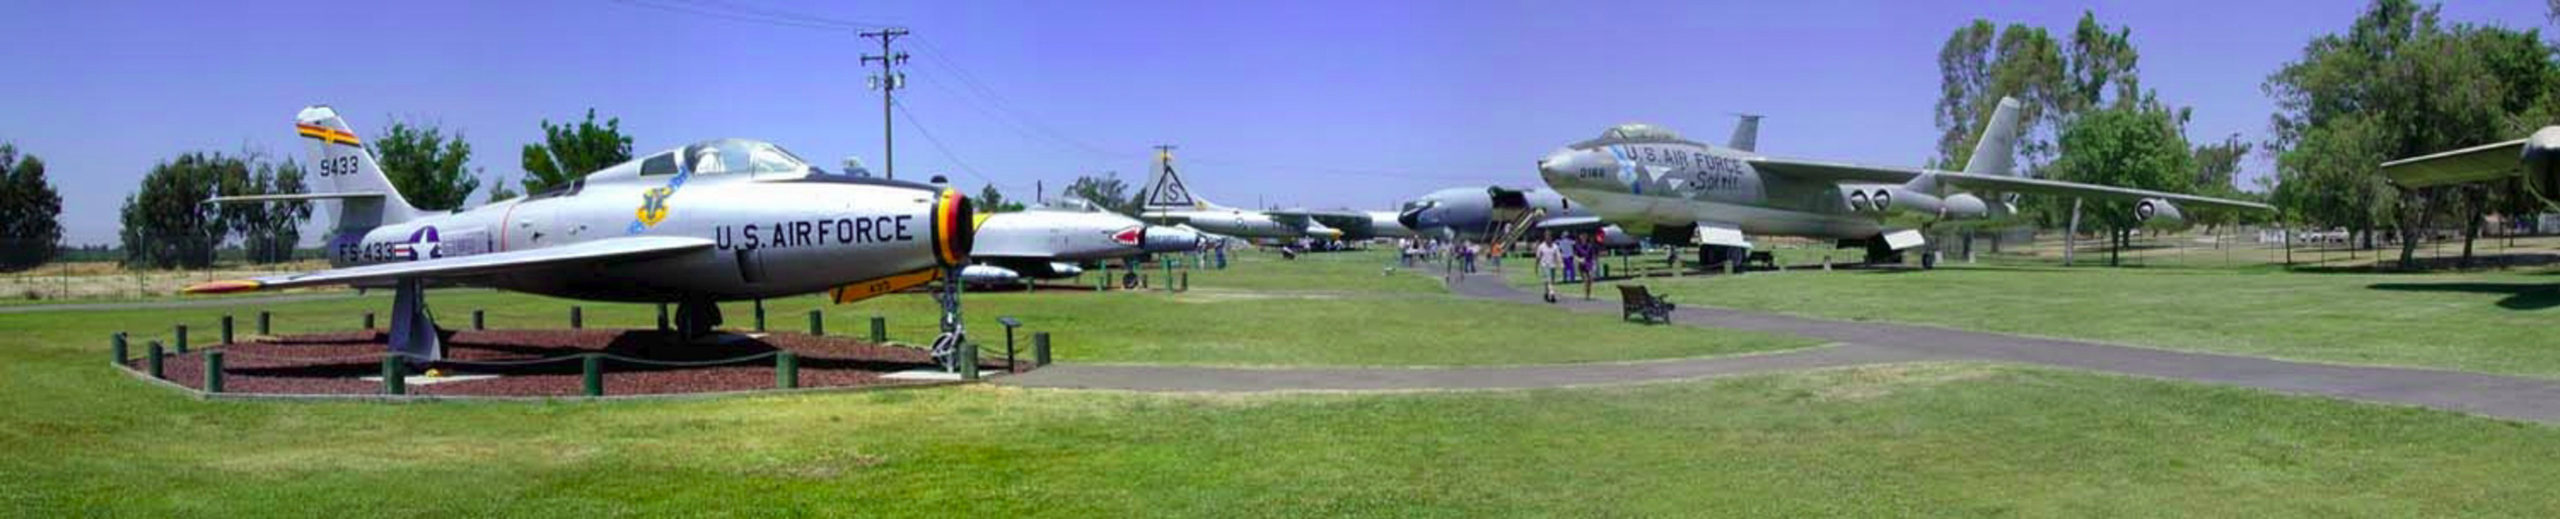 Castle Air Museum, Atwater CA, May 2001